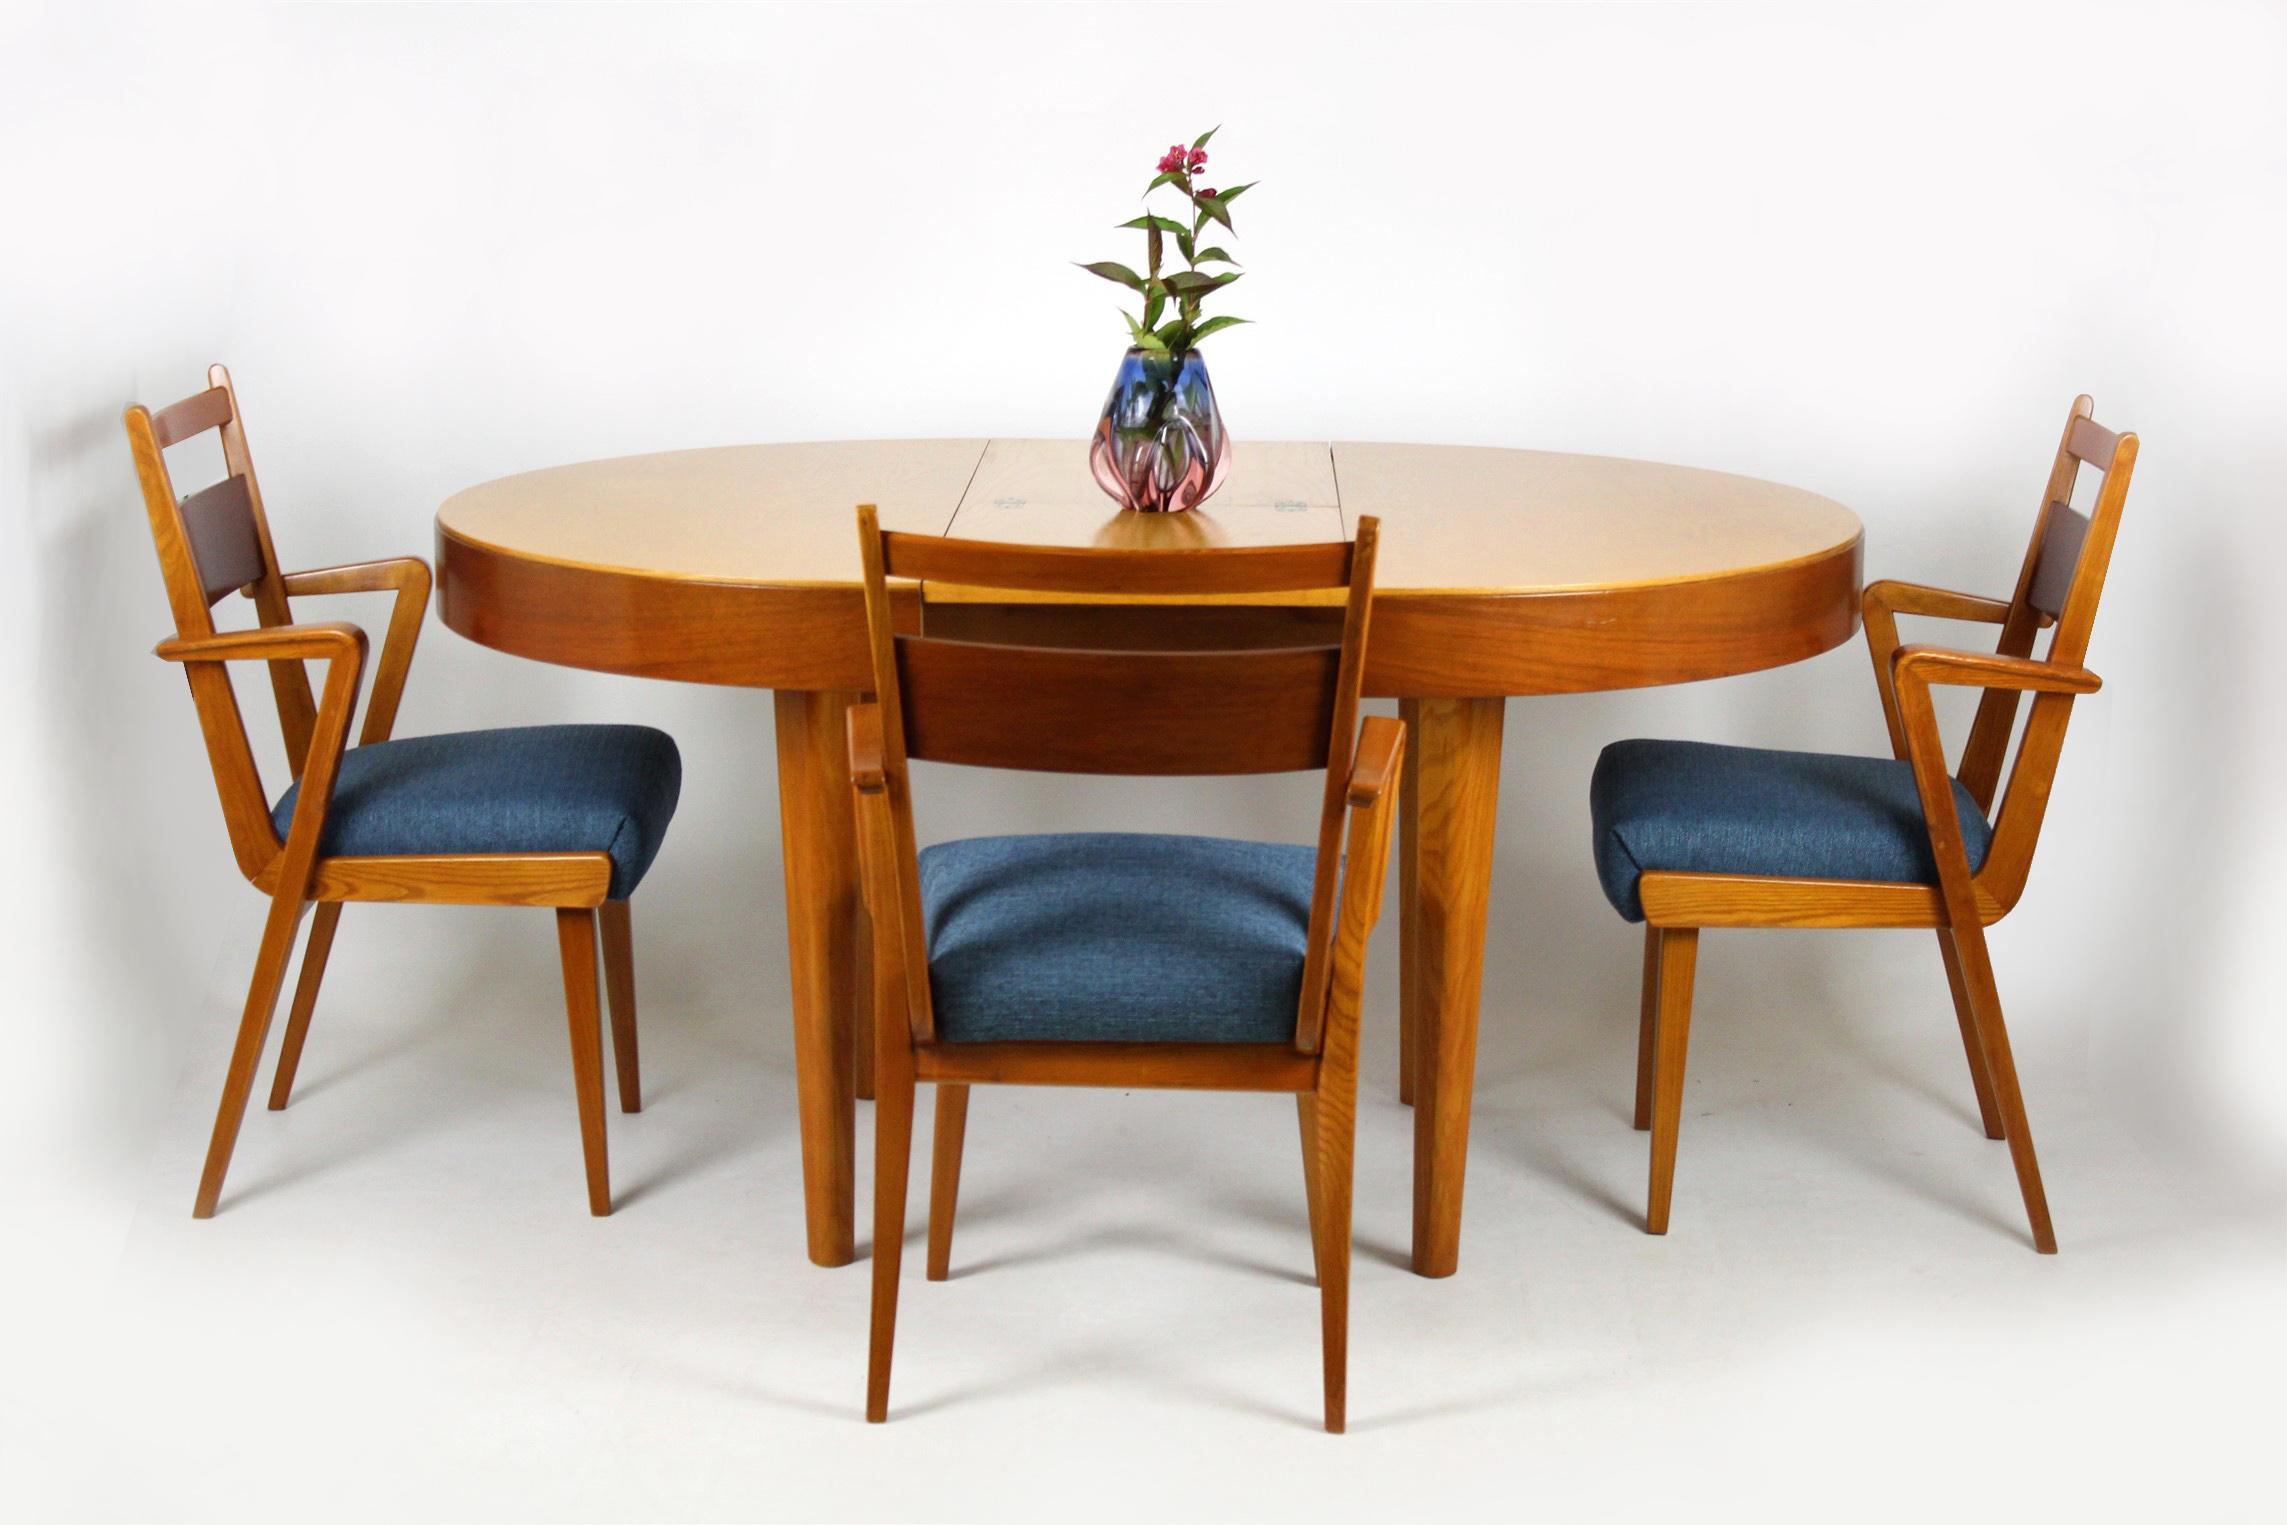 These ash and walnut dining chairs were made by Jitona Sobeslav in the 1950s. The seats have been restored and upholstered with new fabric.
The table from this set can be bought additionally.